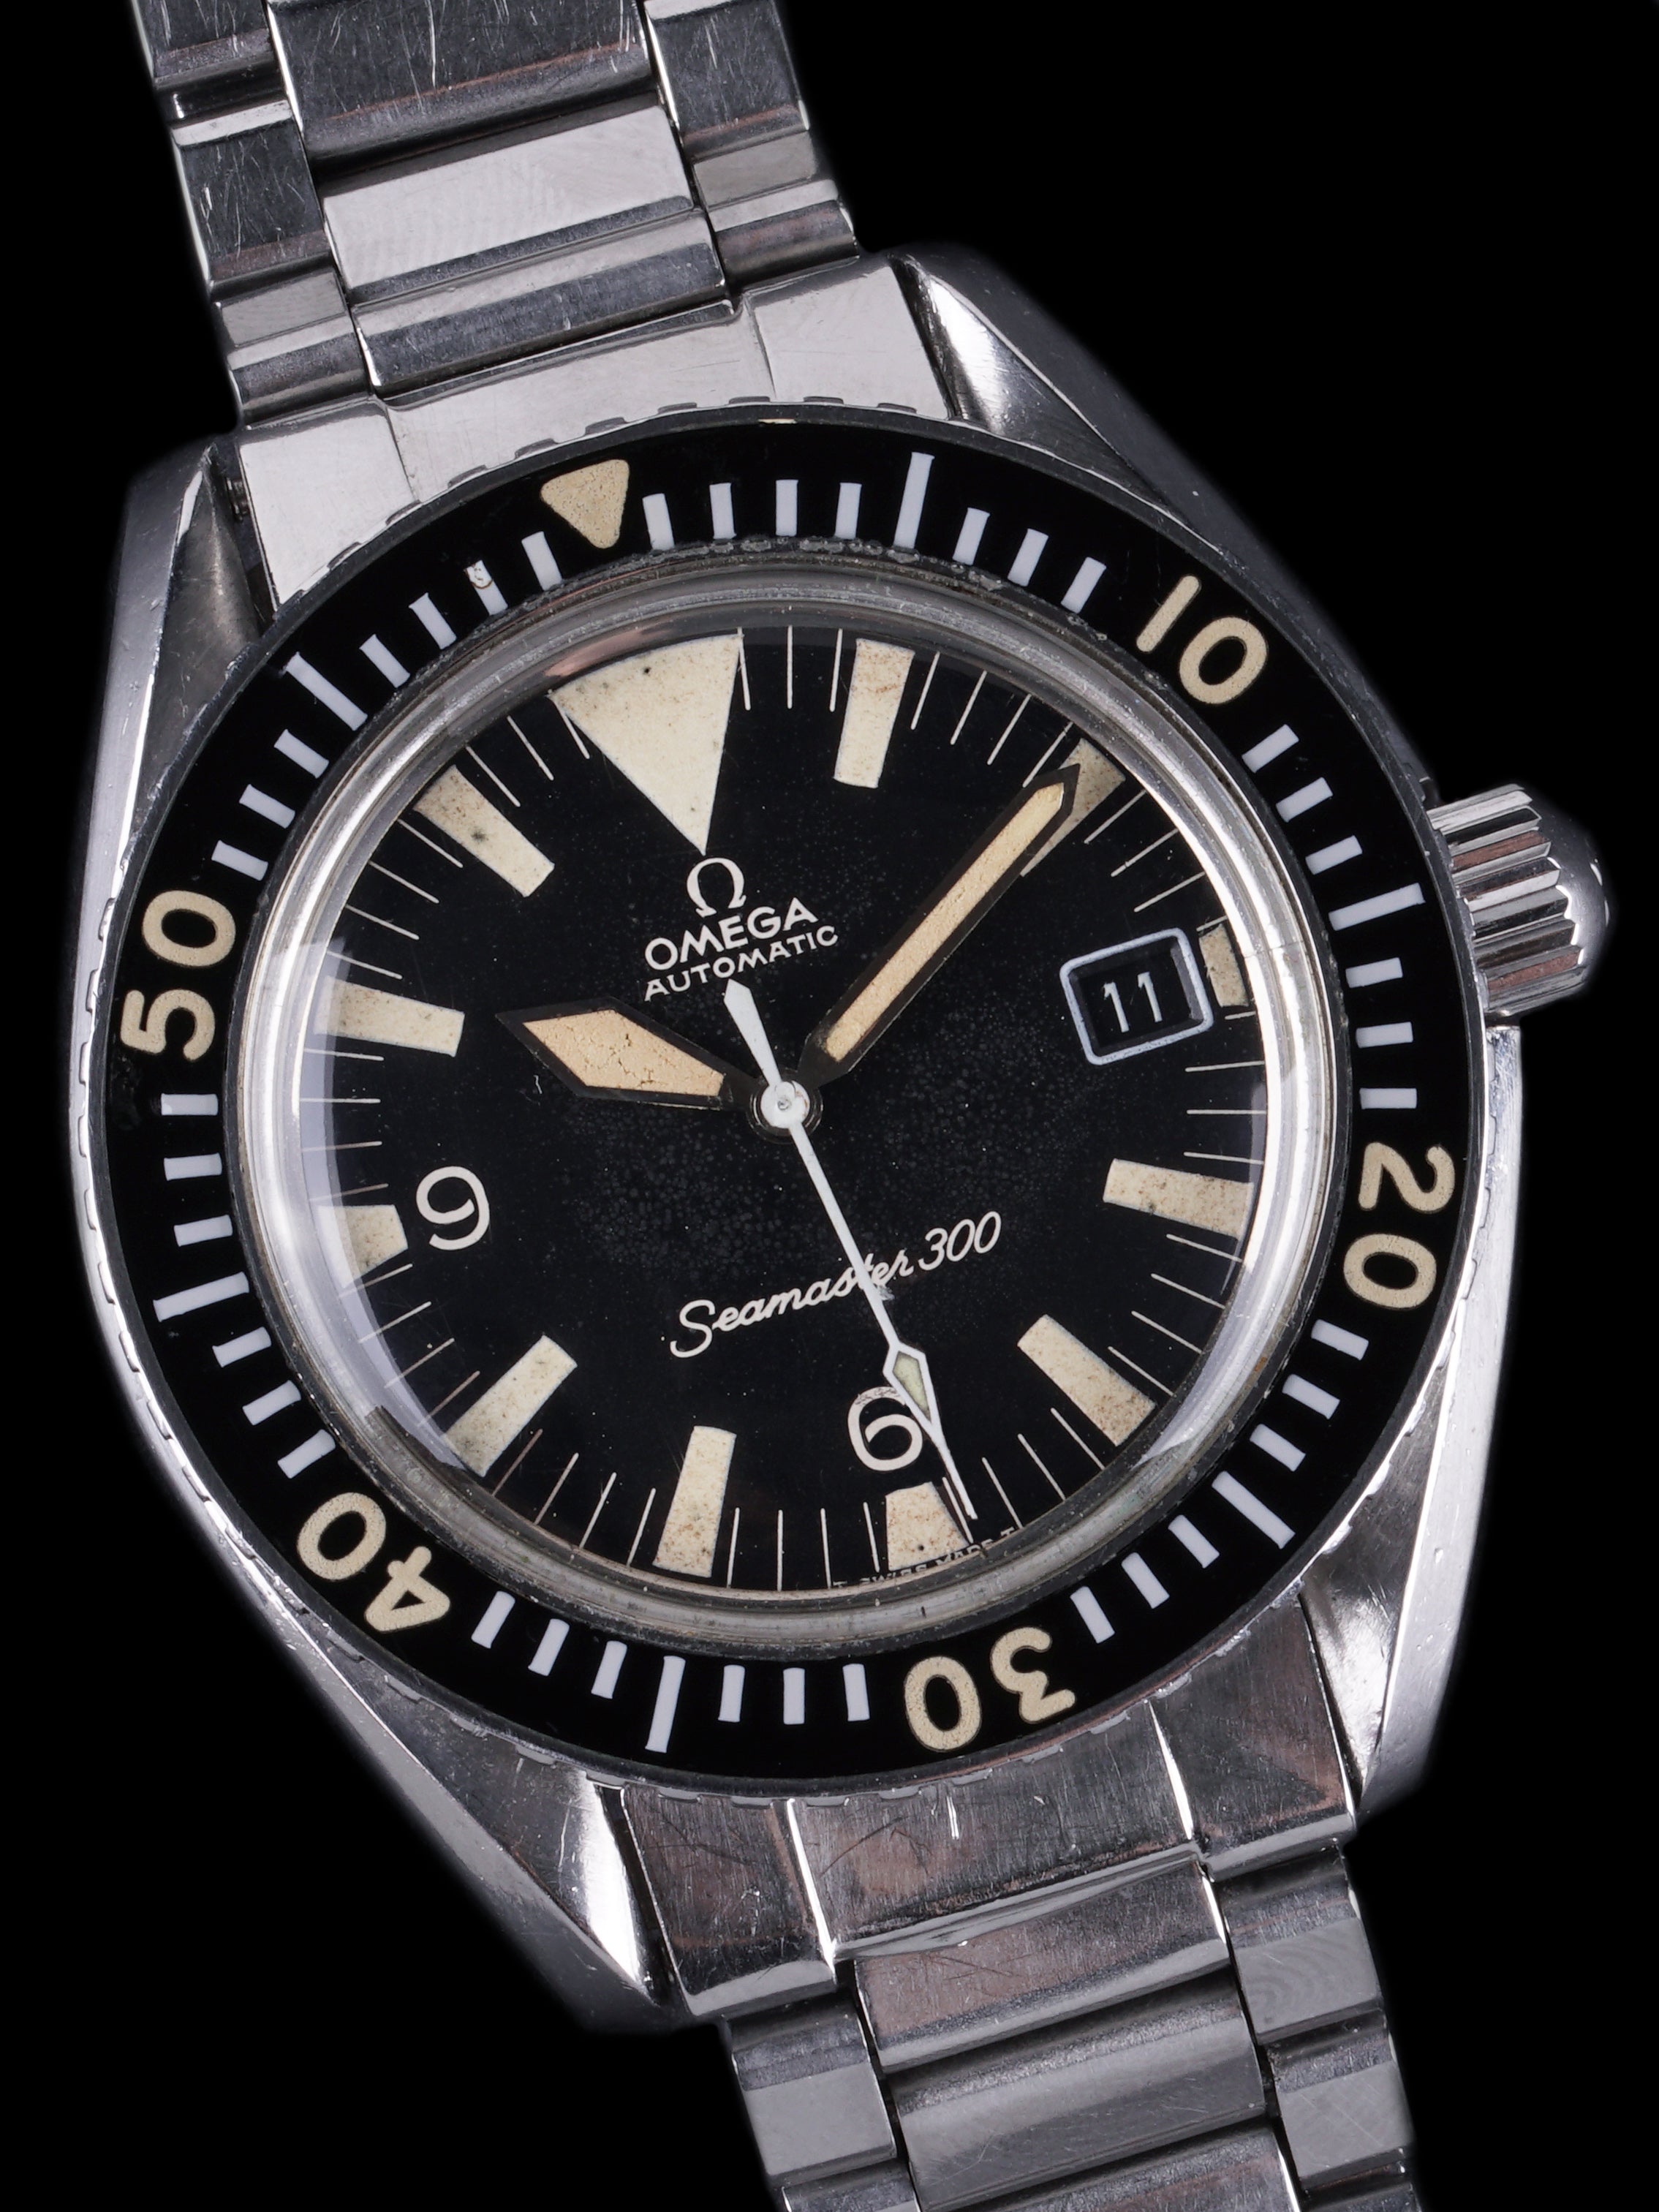 Omega Seamaster 300, Ref 166.024, Stainless Steel, Misprinted Case Back,  Automatic, 1969 - Estates Consignments Omega Seamaster 300, Ref 166.024,  Stainless Steel, Misprinted Case Back, Automatic, 1969